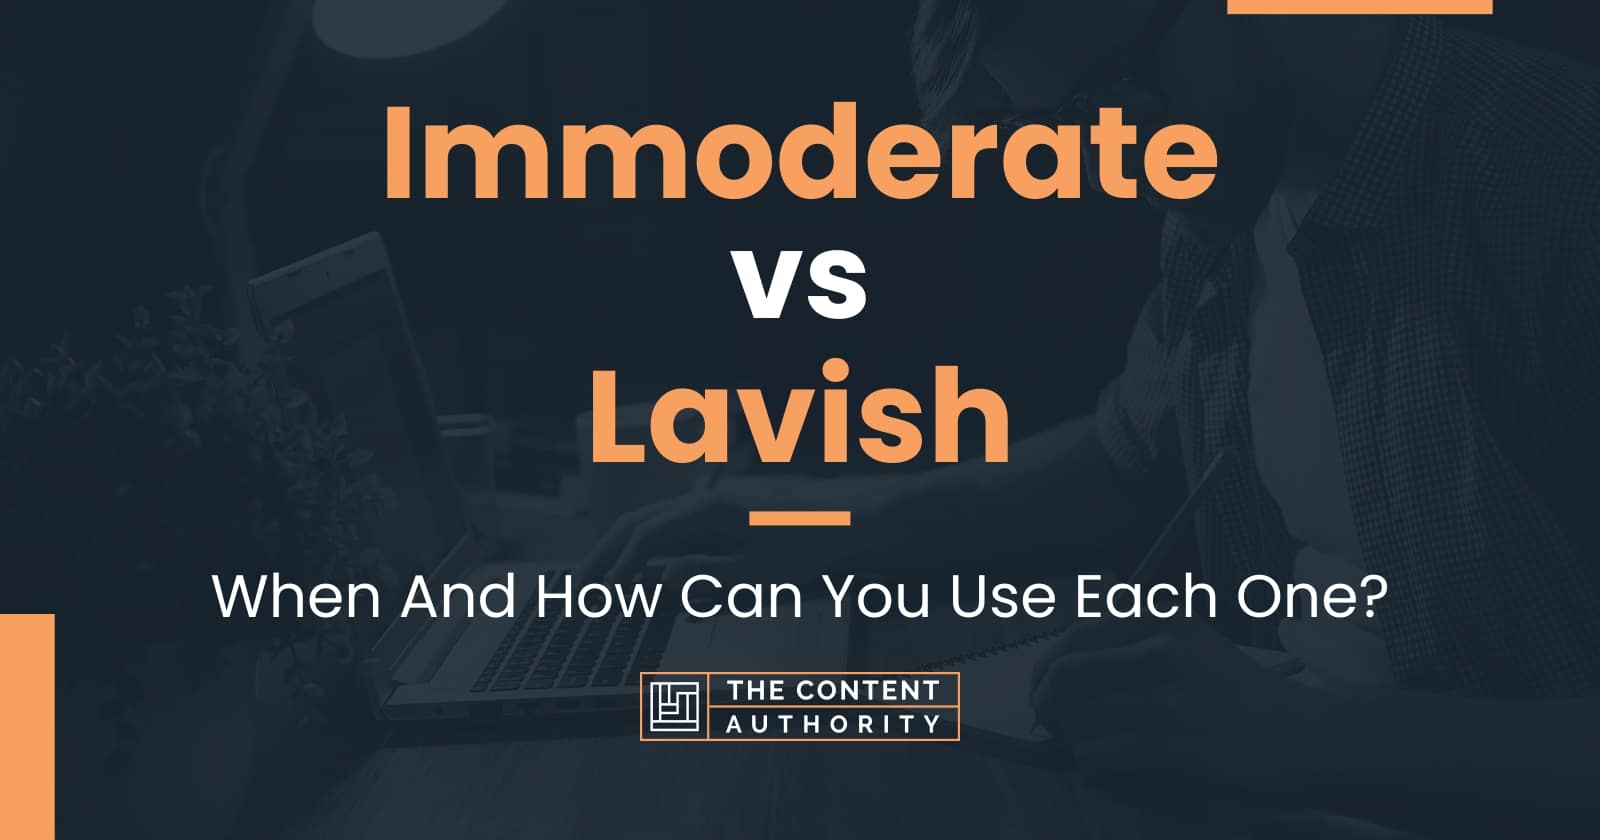 Immoderate vs Lavish: When And How Can You Use Each One?